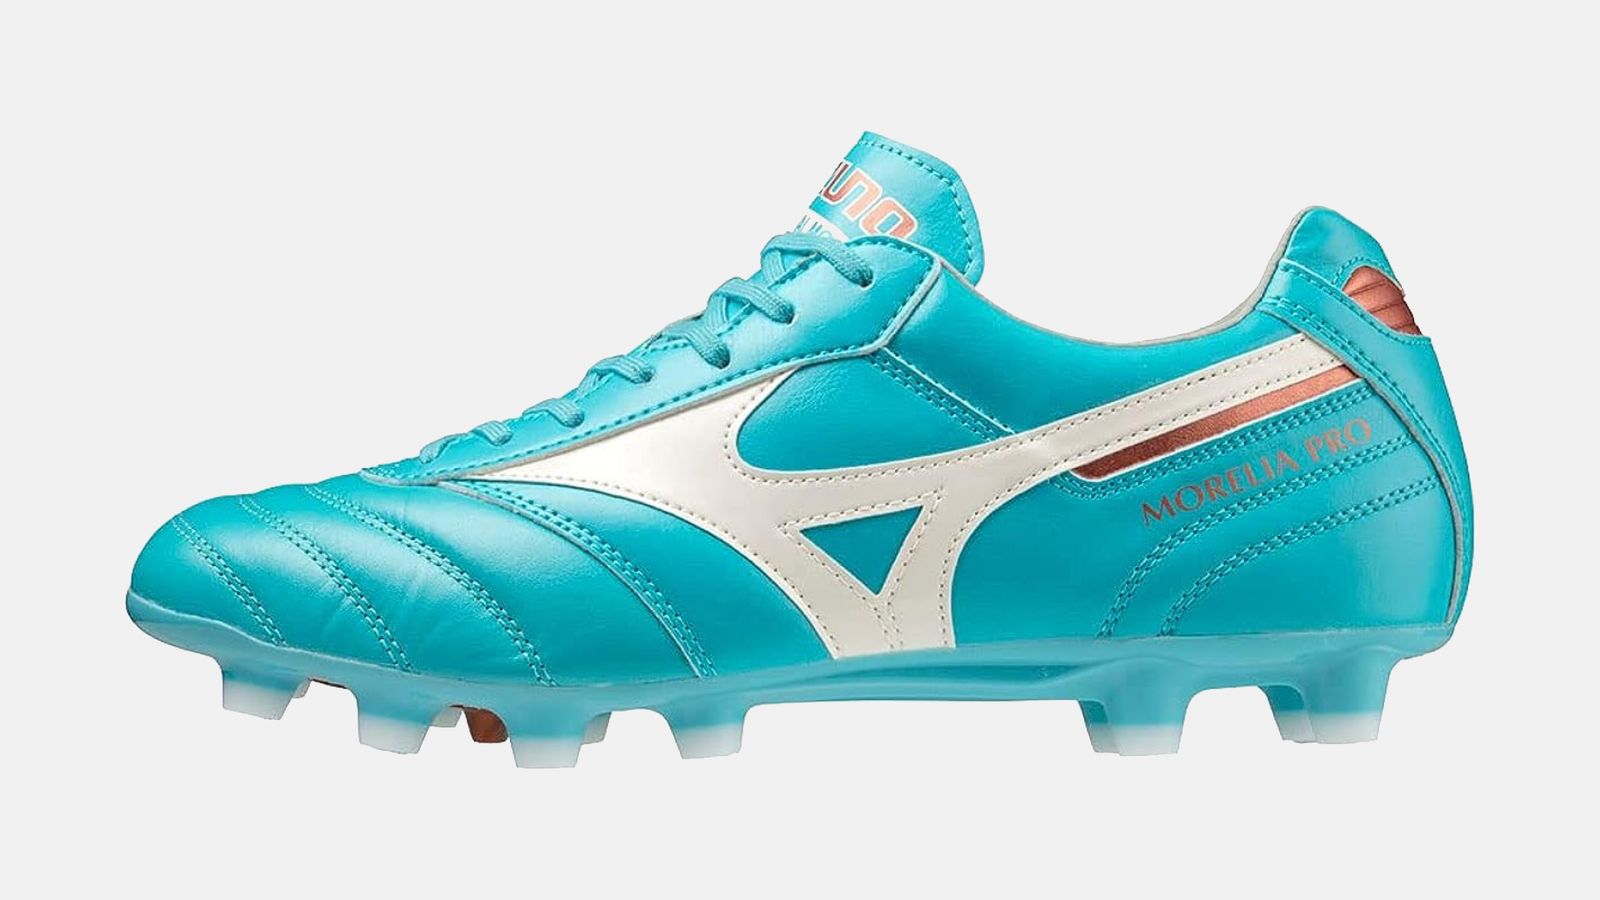 Mizuno Morelia II Pro product image of a bright blue football boot featuring orange and white details.